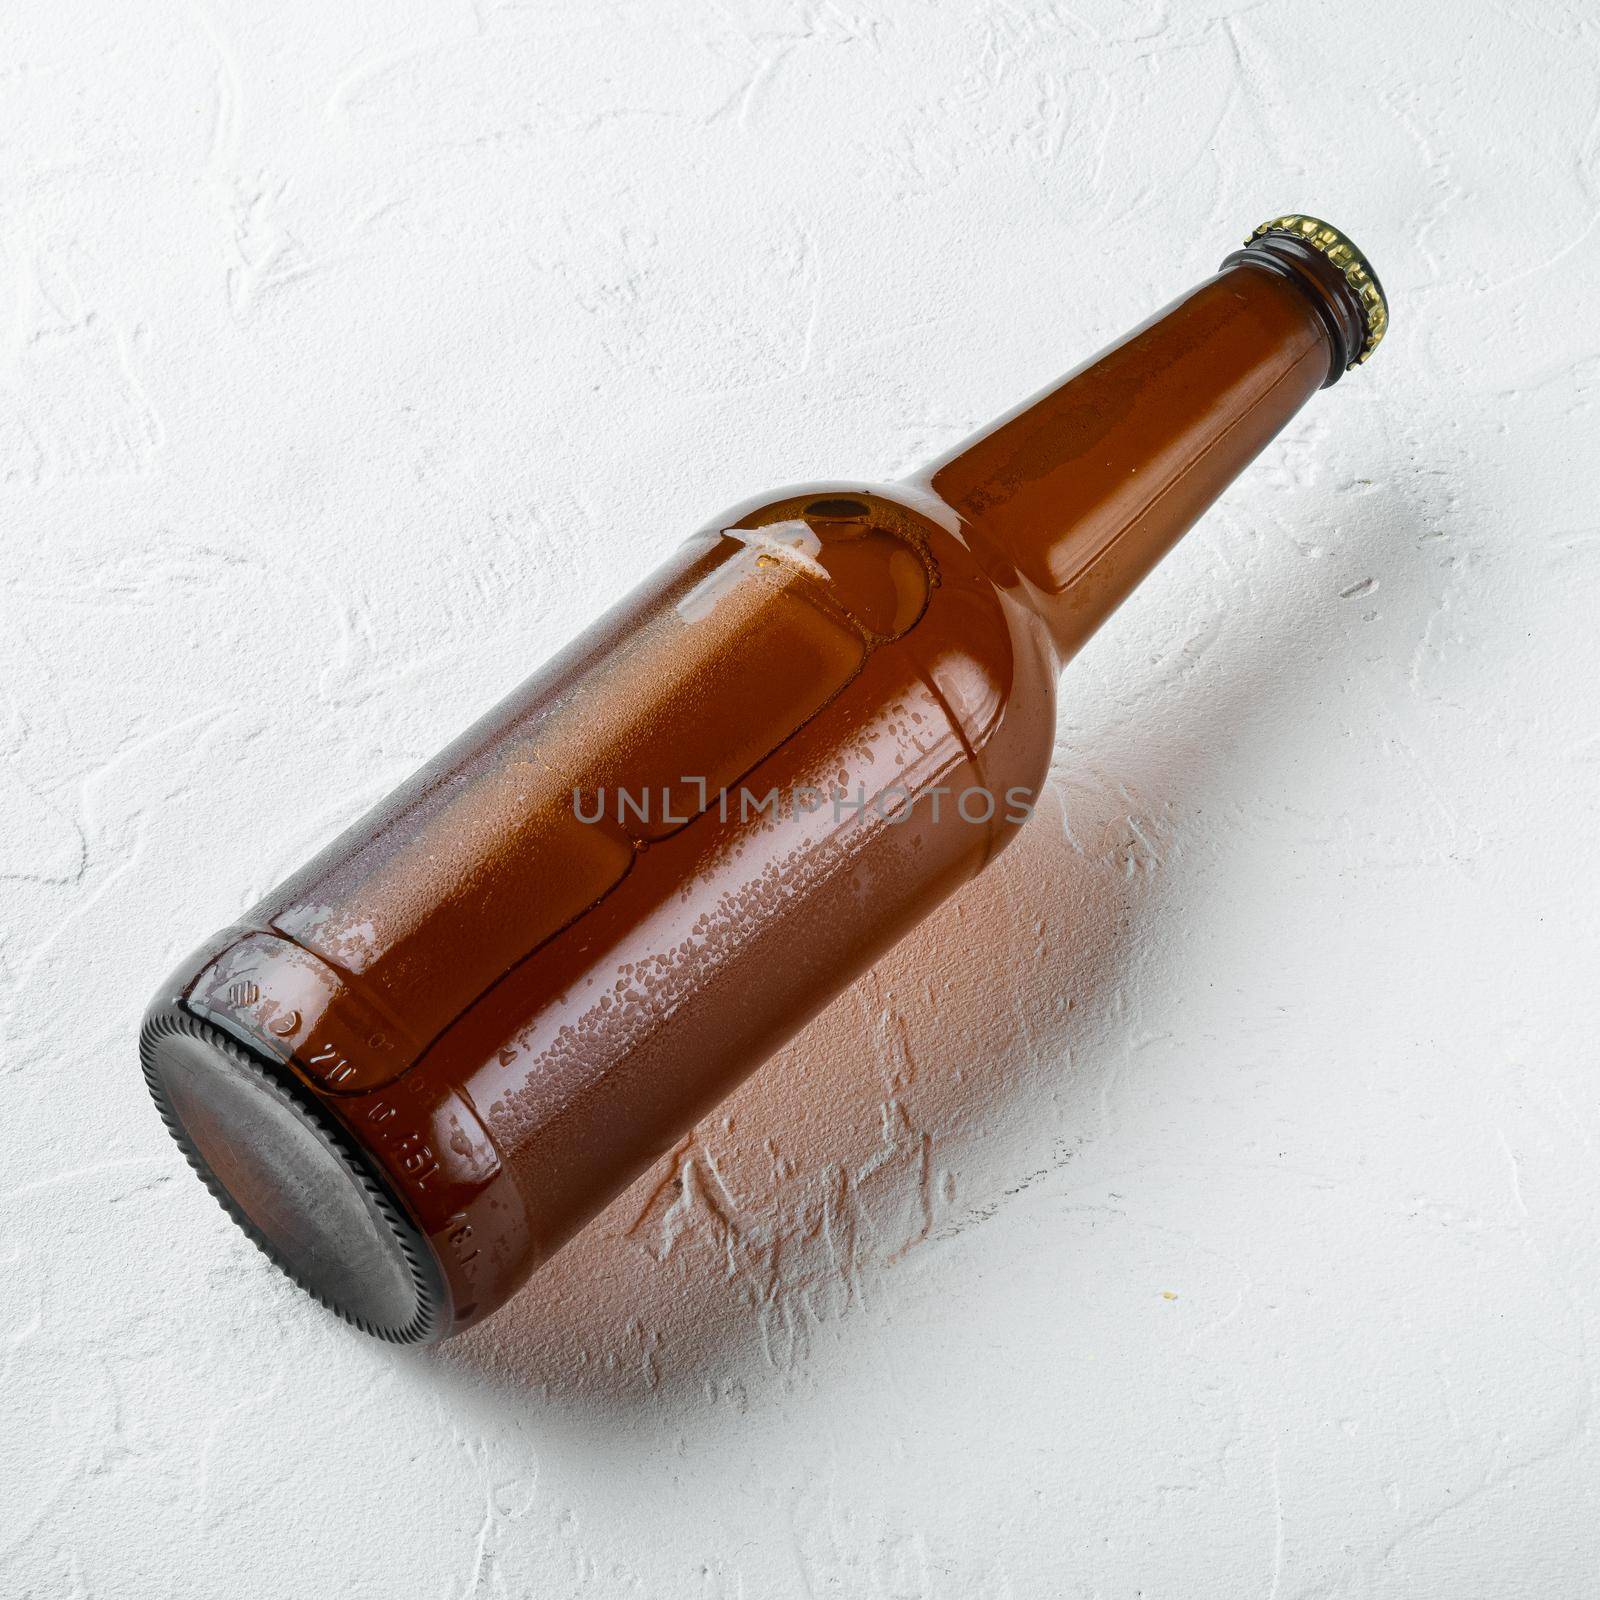 Fresh beer in glass bottles, on white stone surface, square format by Ilianesolenyi